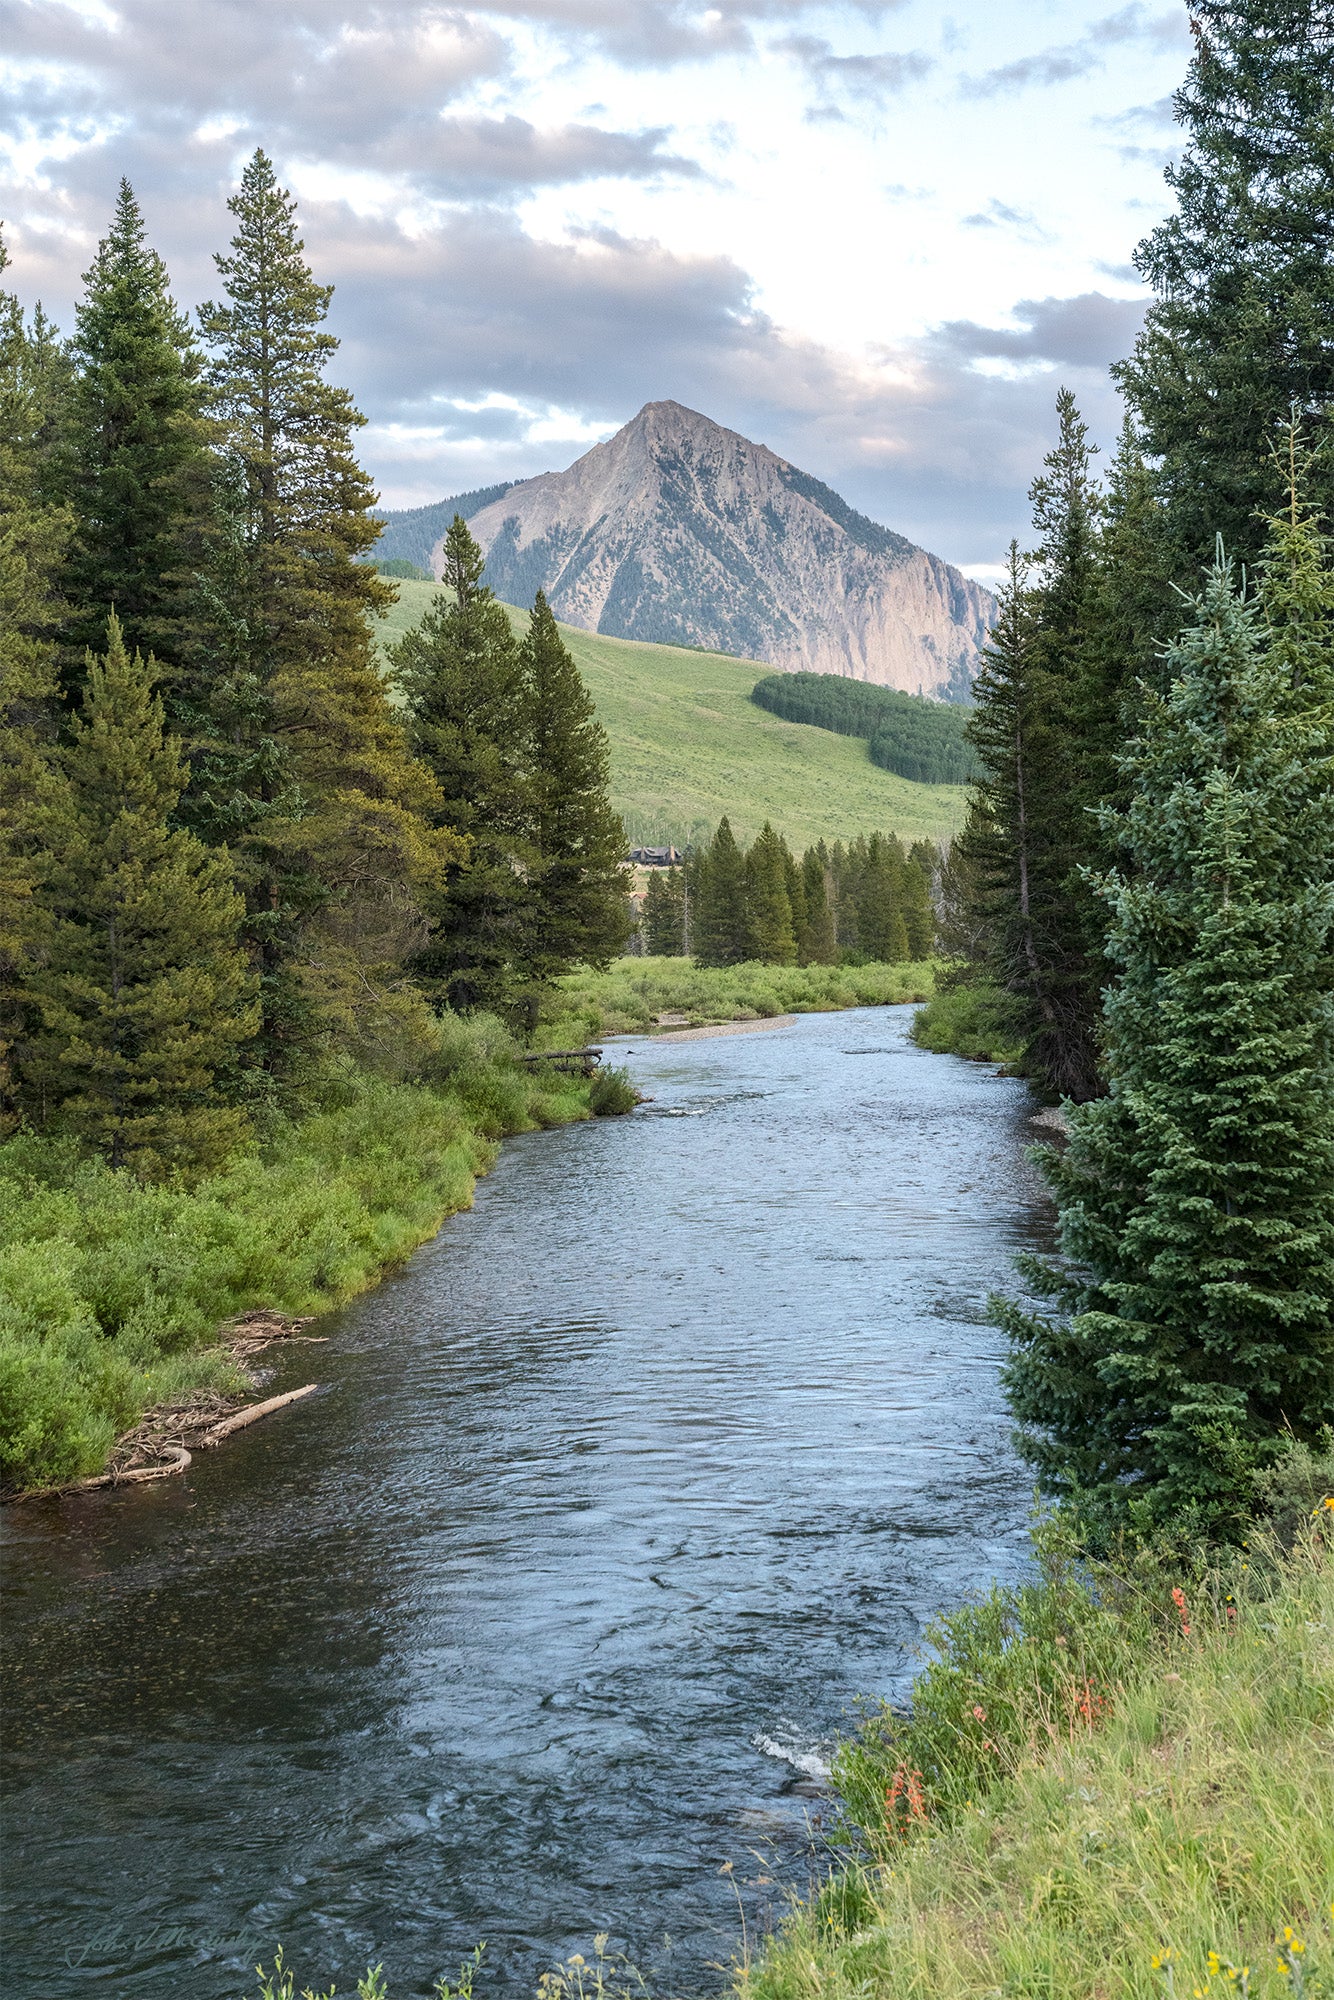 The Slate River in Crested Butte, Colorado is beautiful. I was struck by the trees framing the mountain and river, while the setting sun was just starting to color the clouds in this landscape photo.